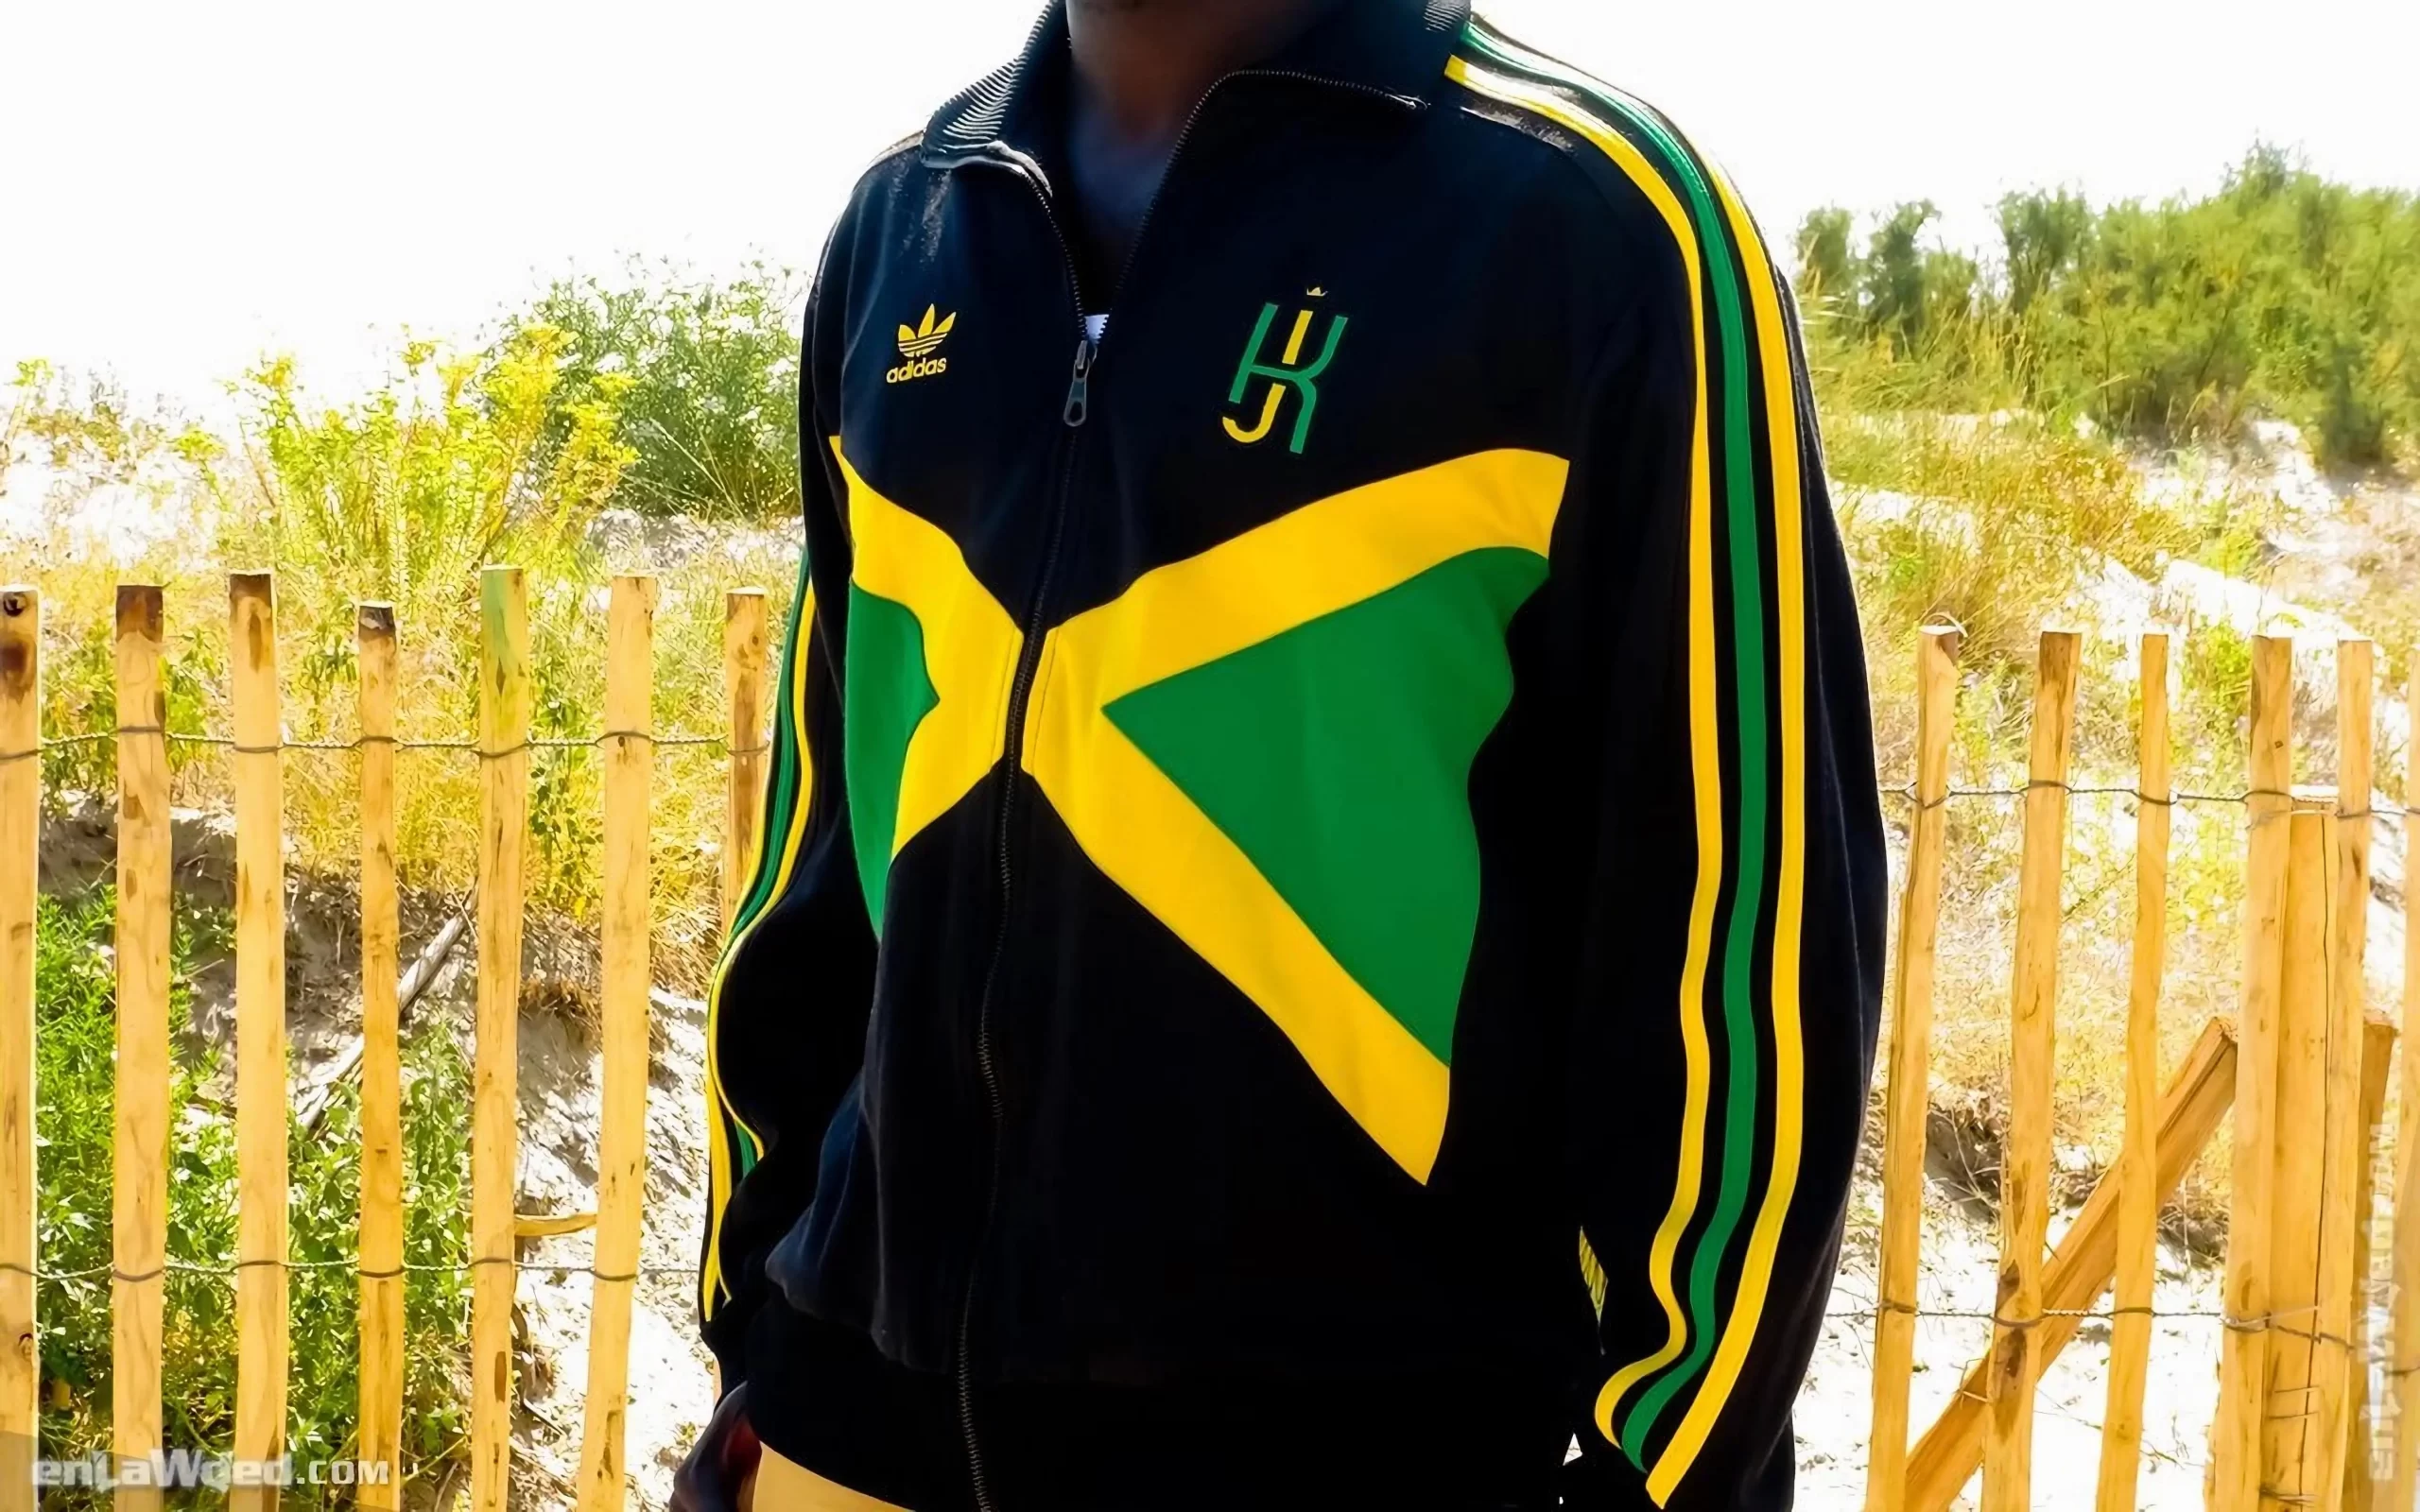 Men’s 2006 Kingston Jamaica TT by Adidas Originals: Blessed (EnLawded.com file #lmc3lat02rr93909hes)